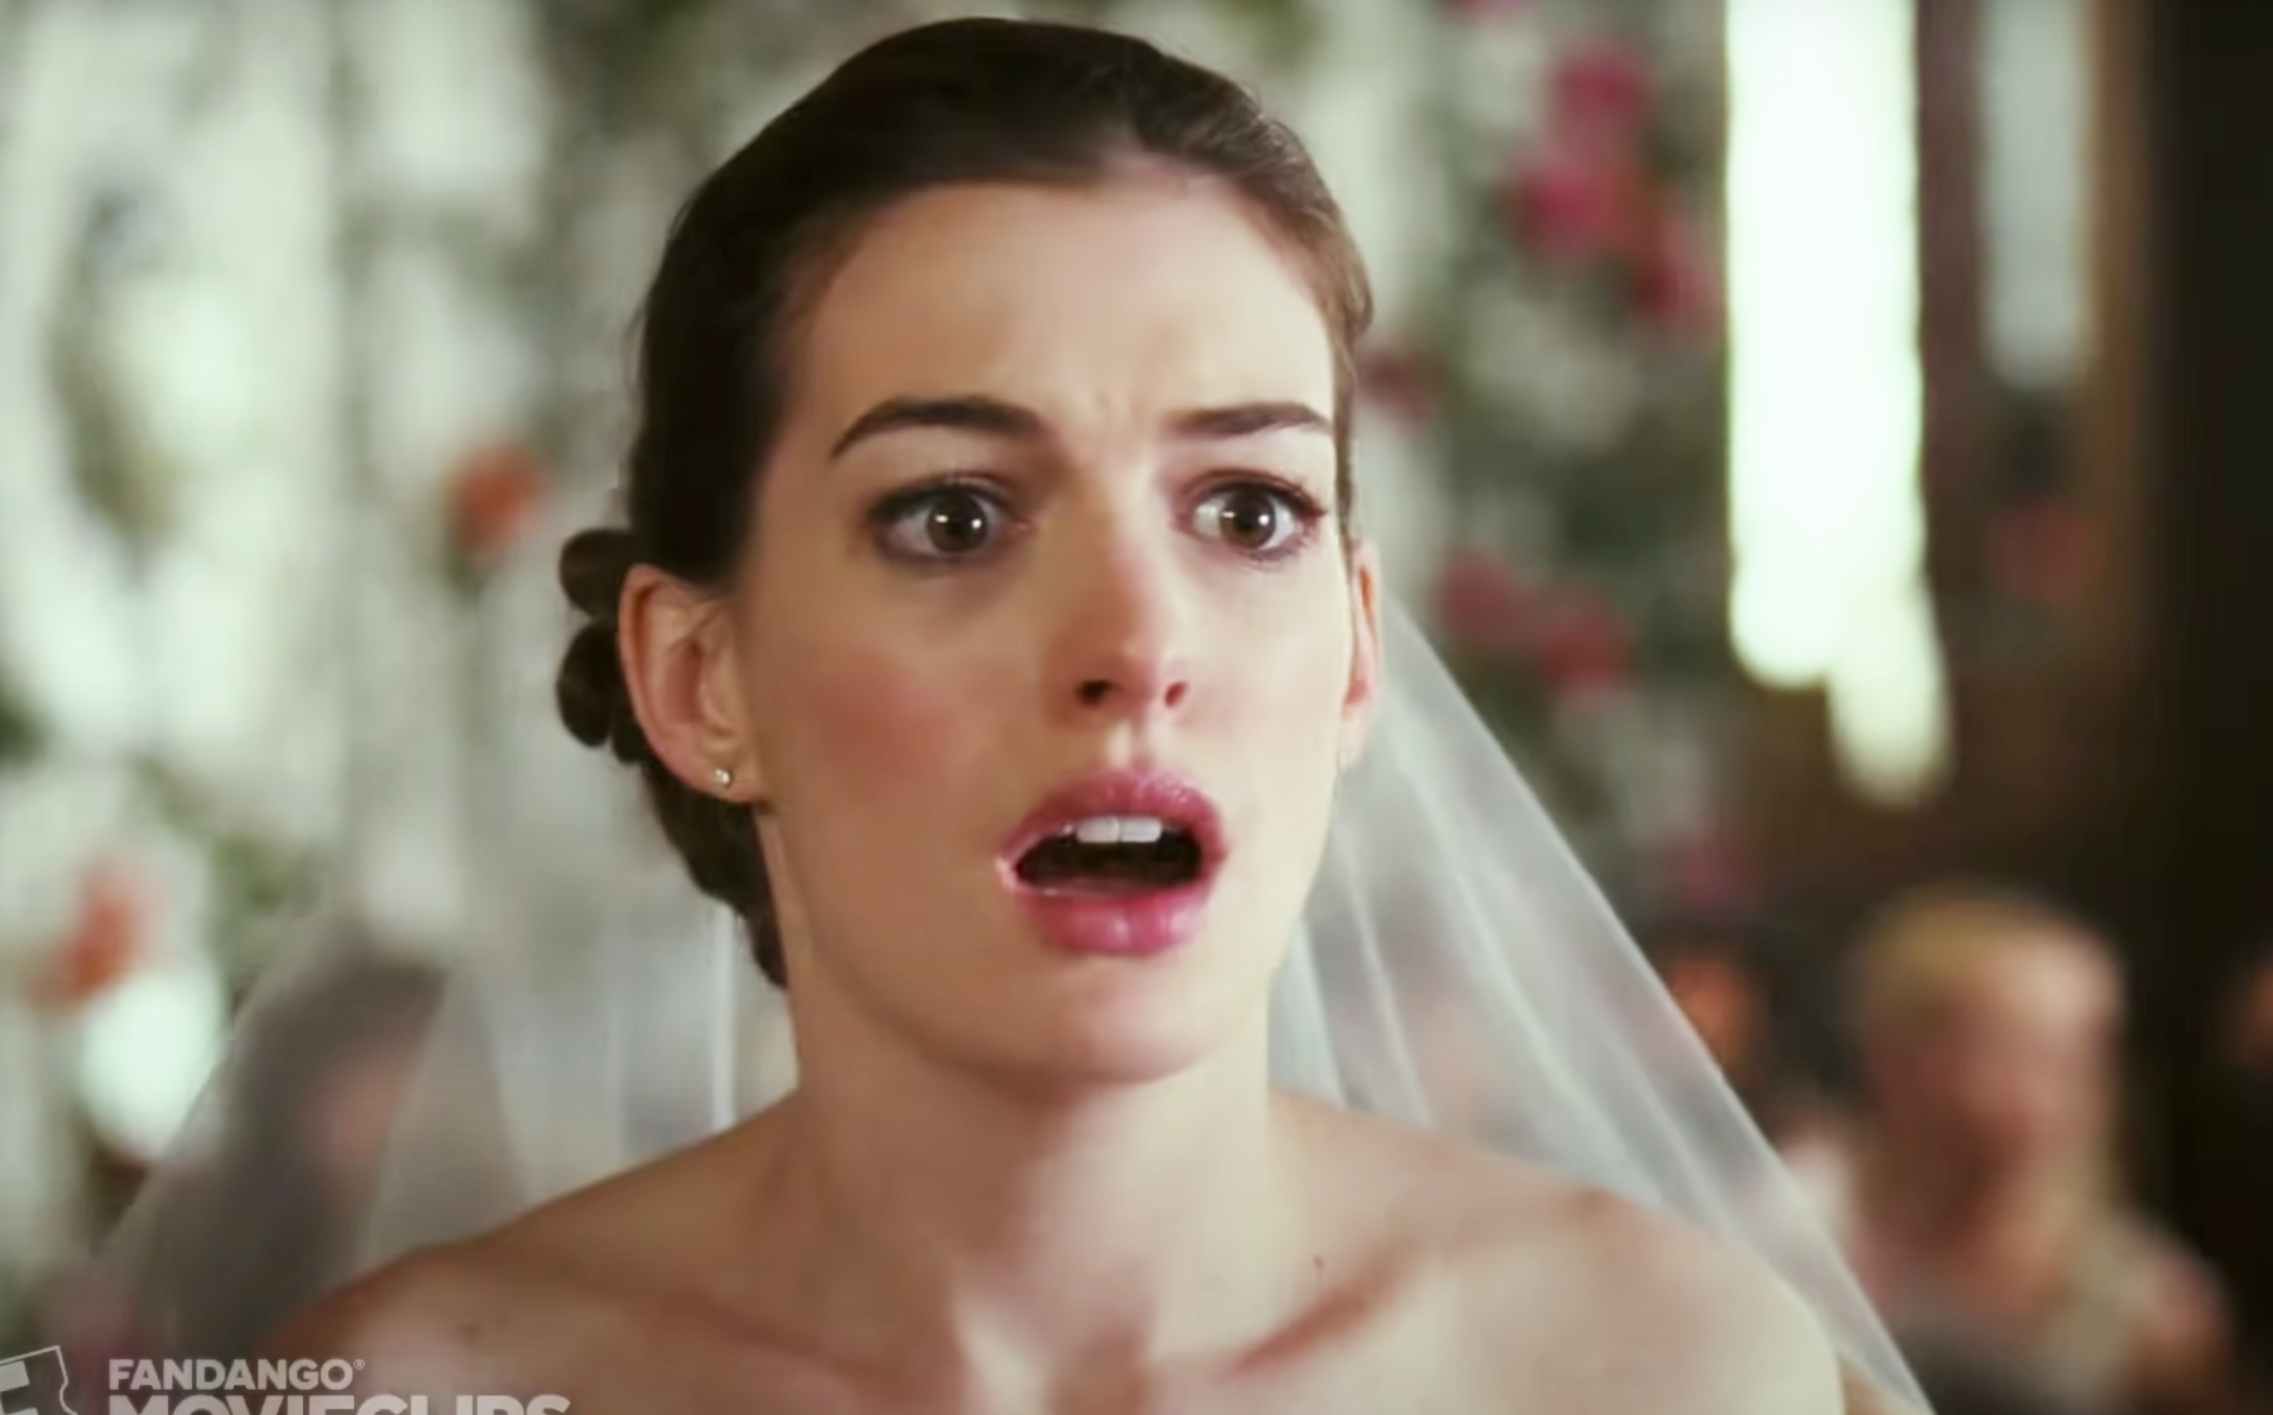 A bride with a shocked expression